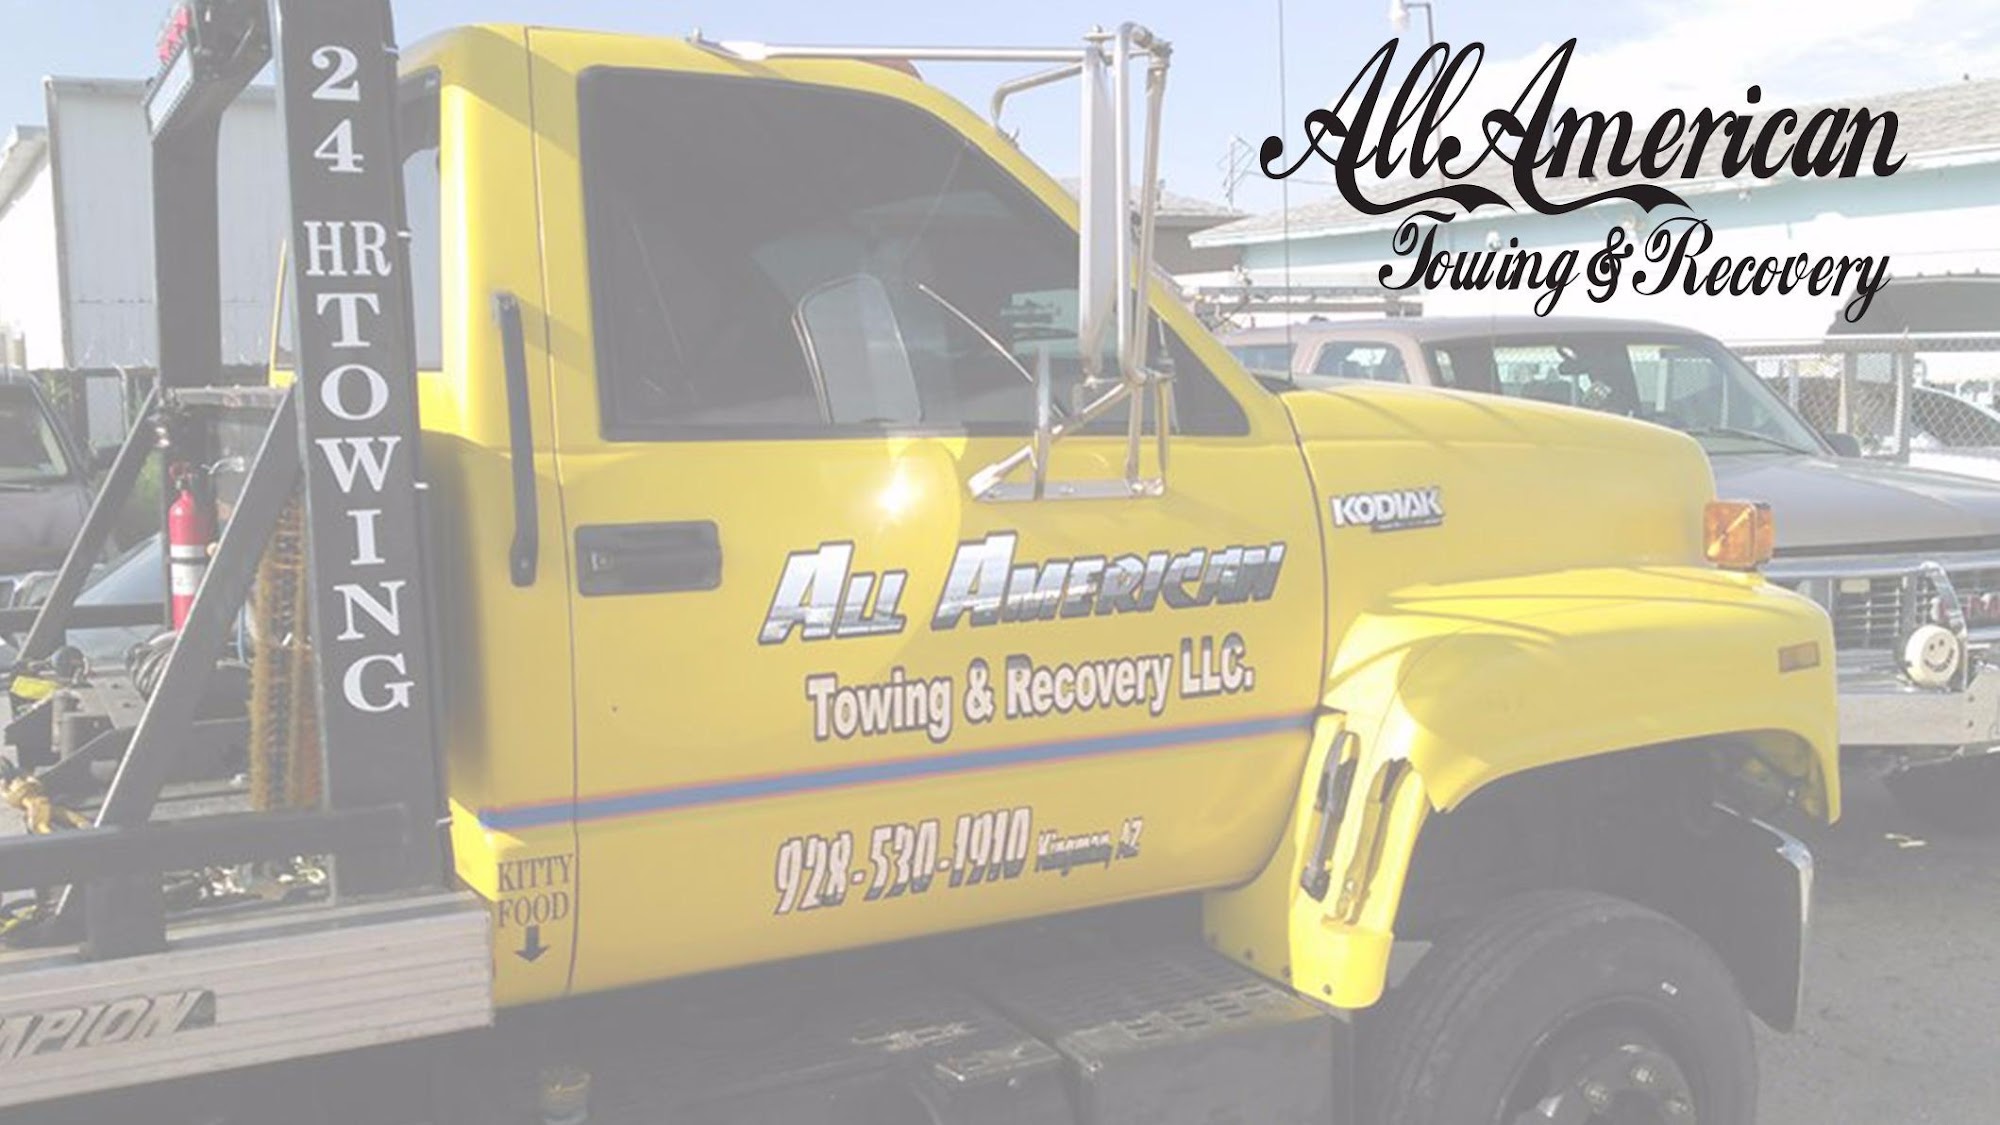 All American Towing & Recovery, LLC